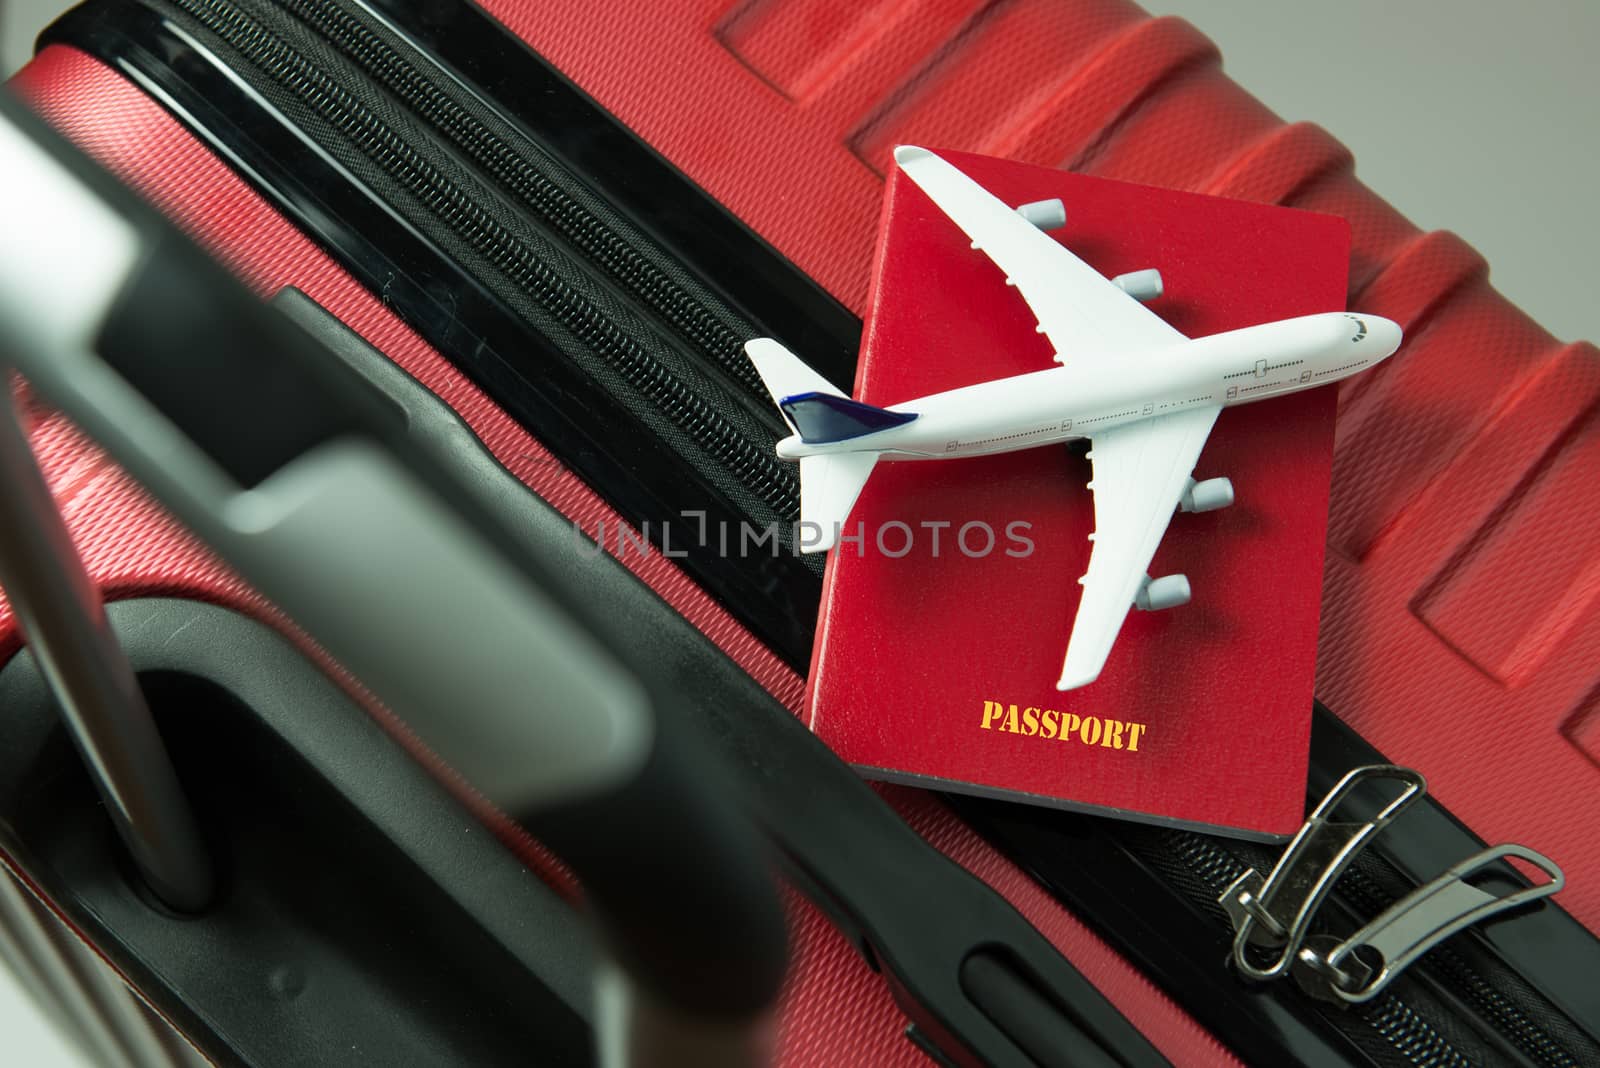 Red passport and airplane small model on red luggage for travel concept